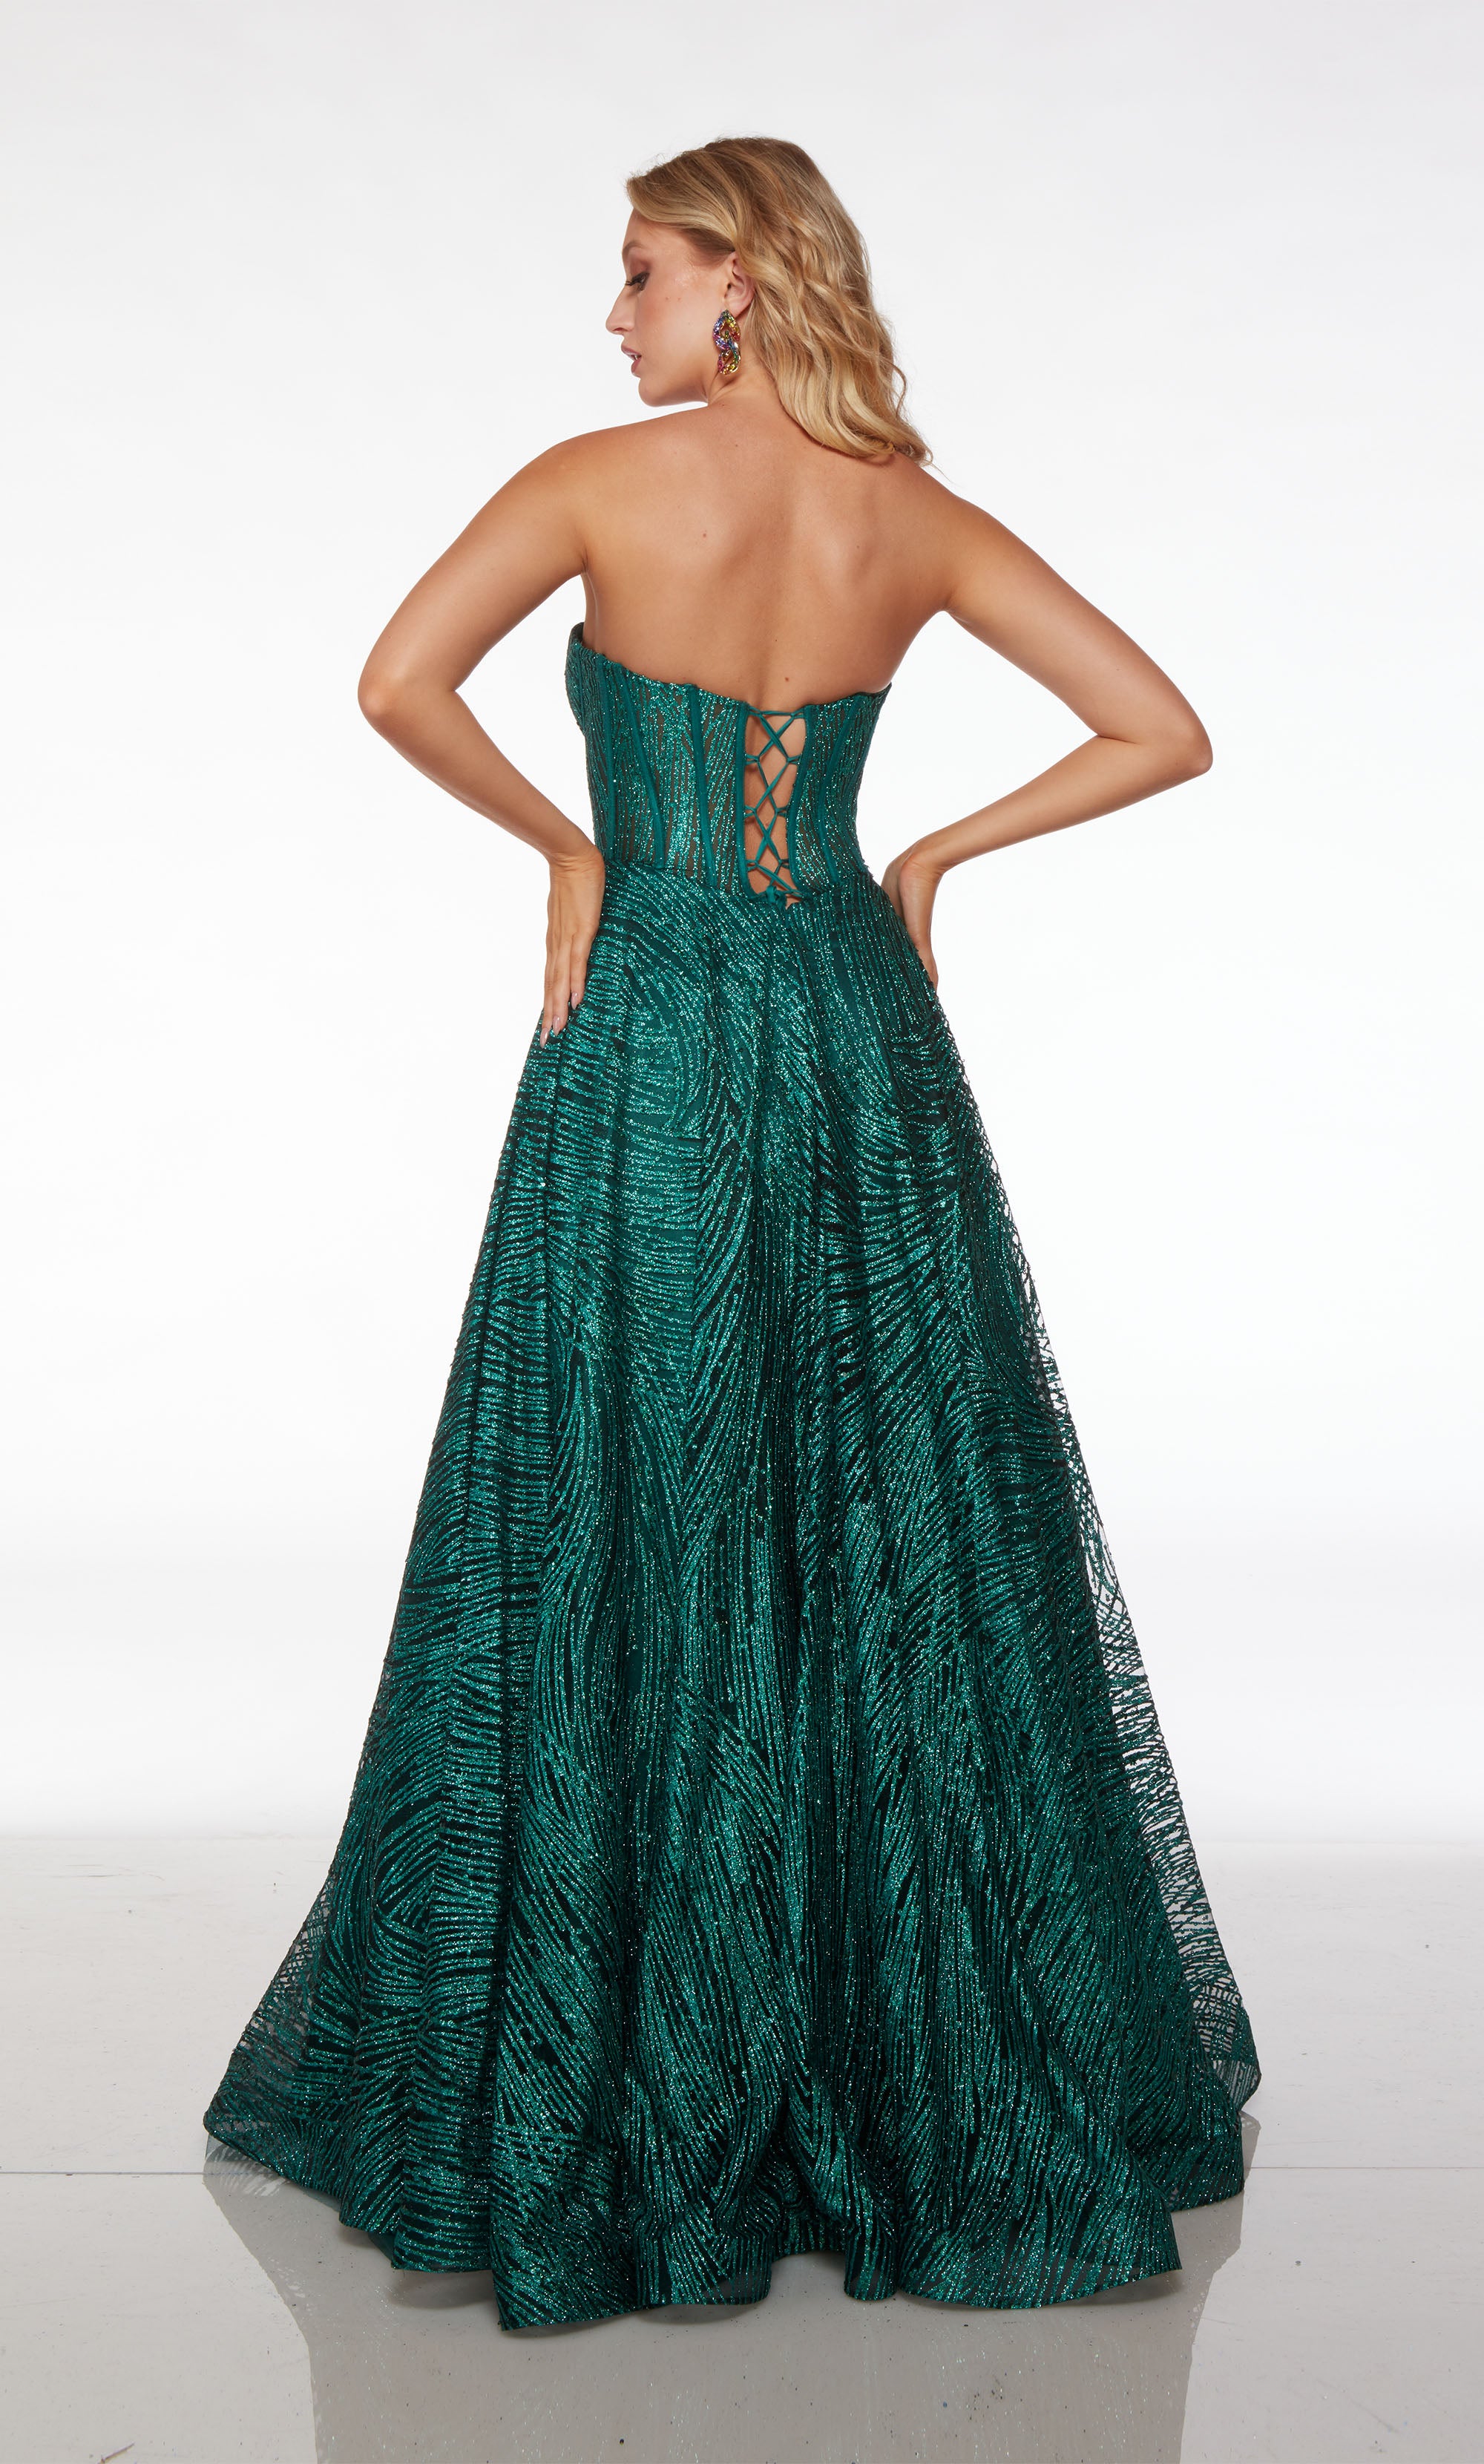 Strapless green corset dress with A-line skirt, lace-up back, and pockets, in stunning glitter tulle fabric for an chic and functional look.